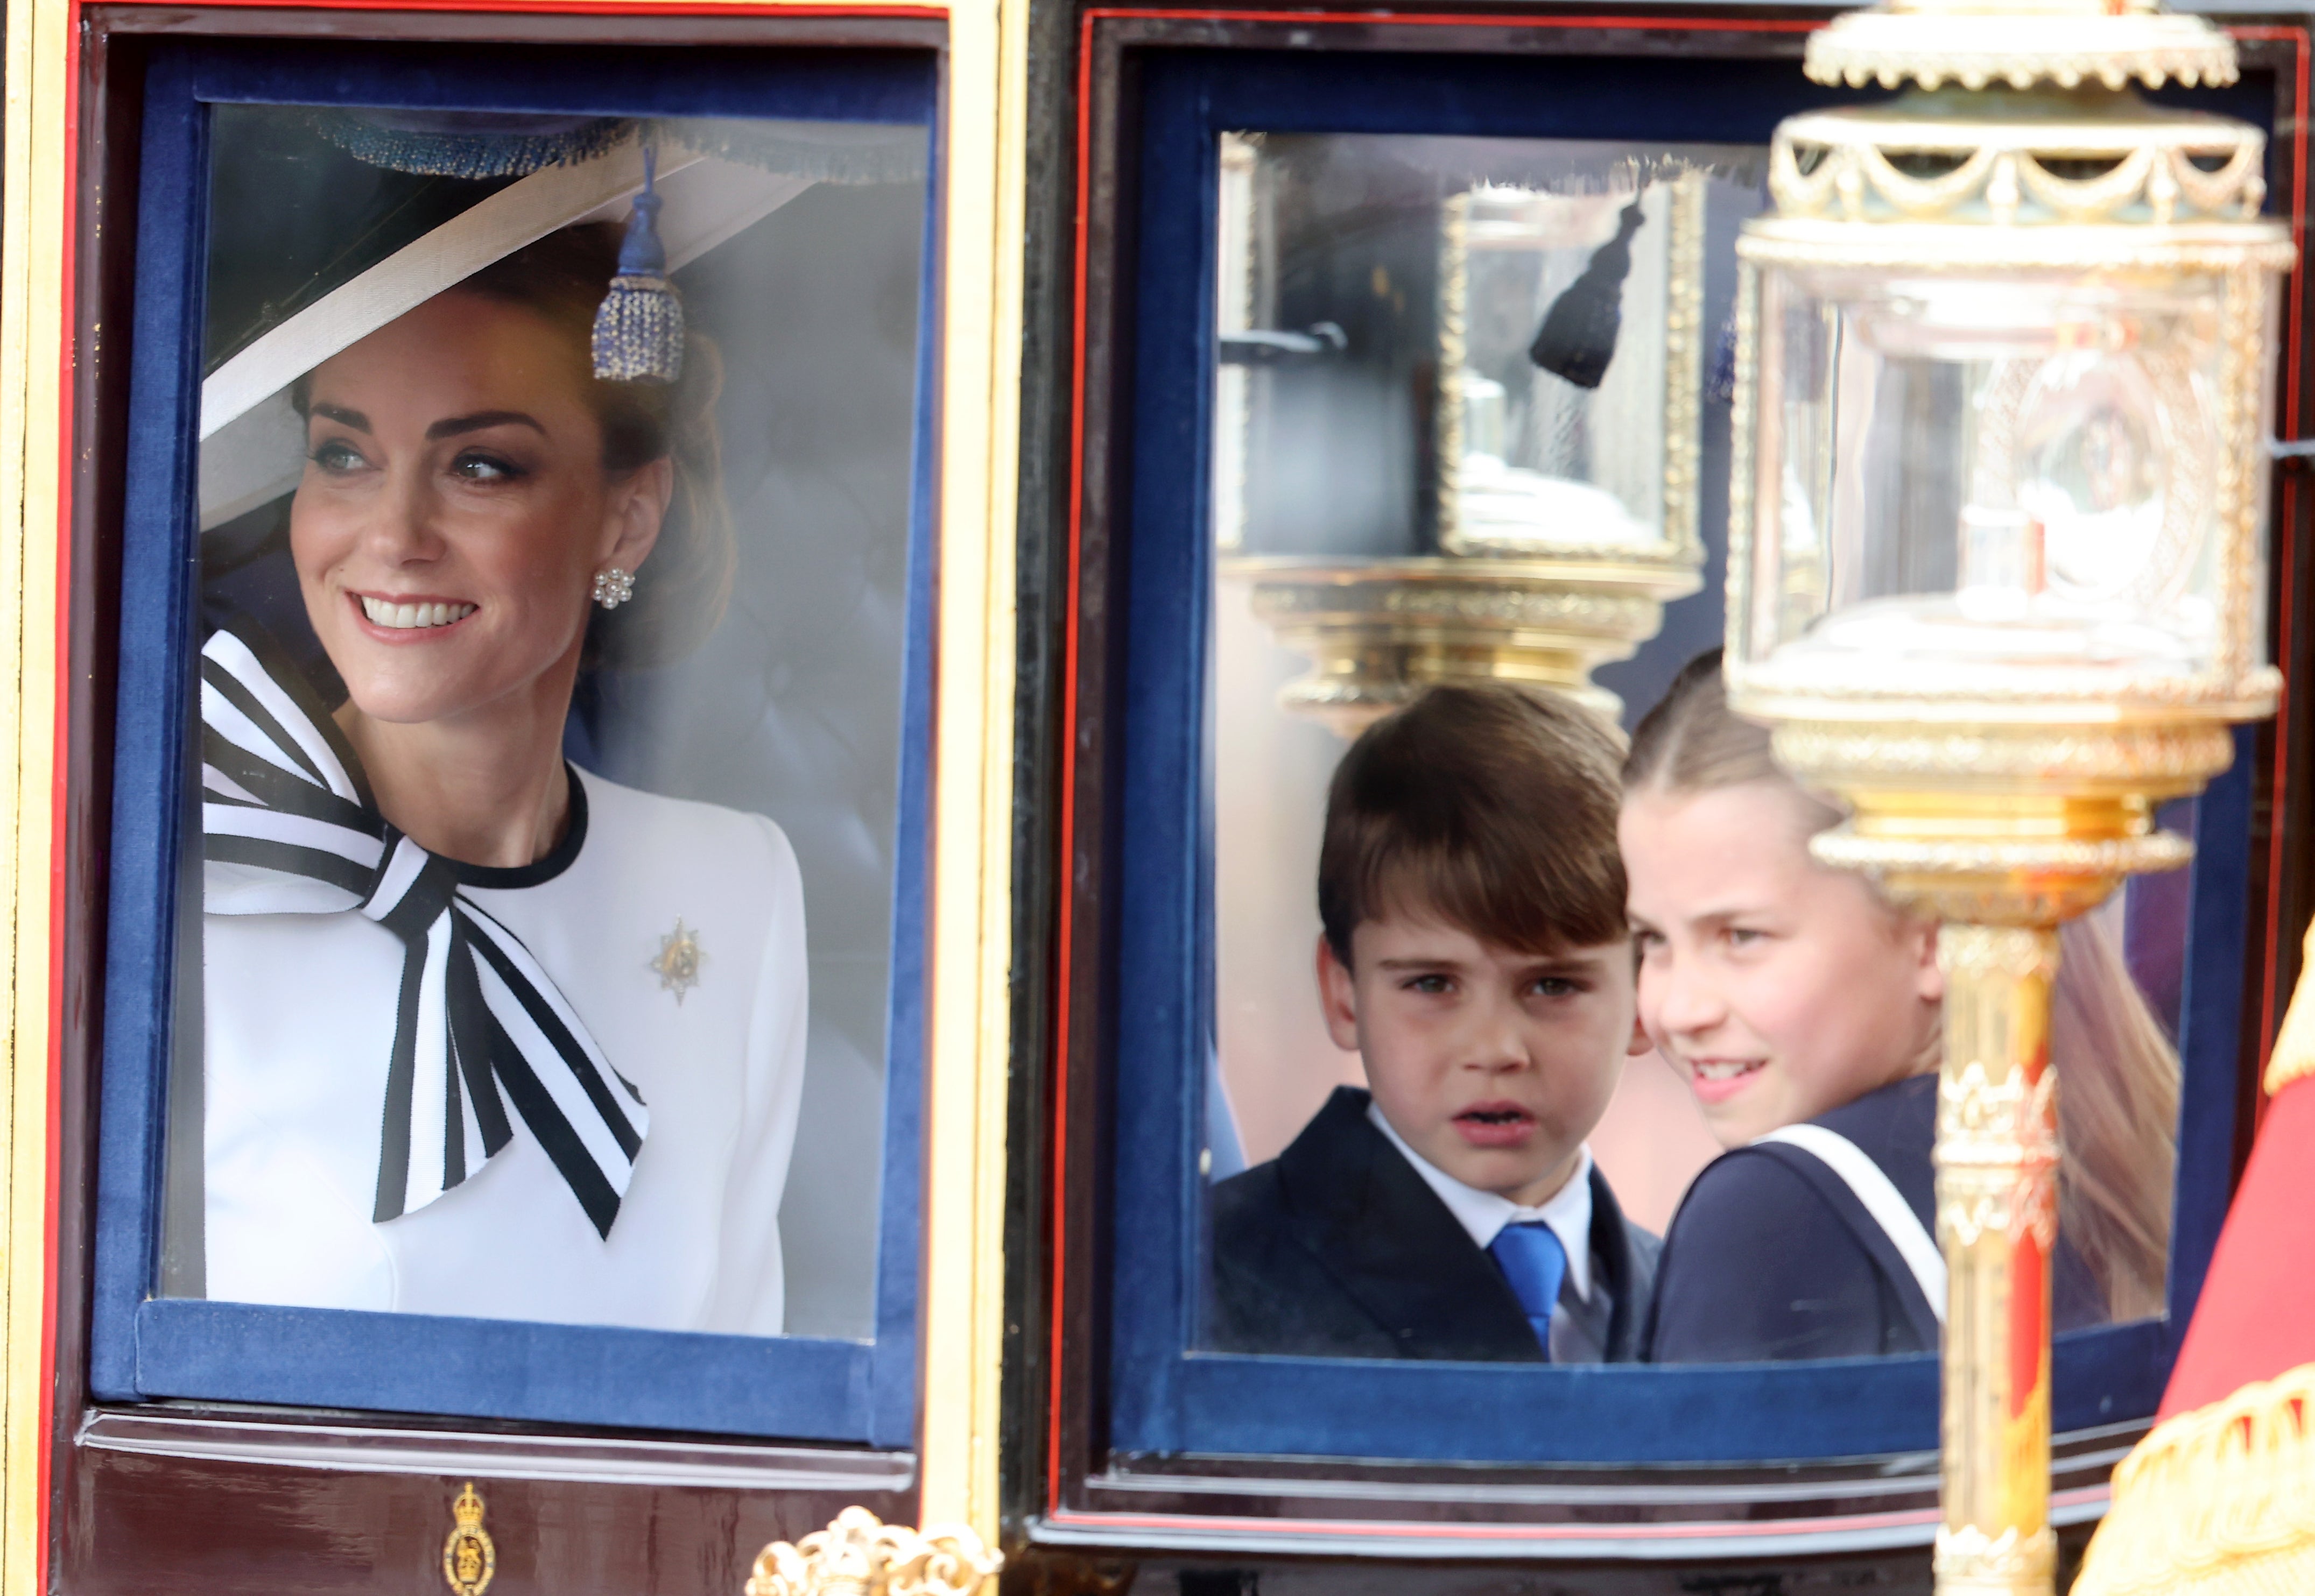 The children joined their mother Kate as she returned to public duties